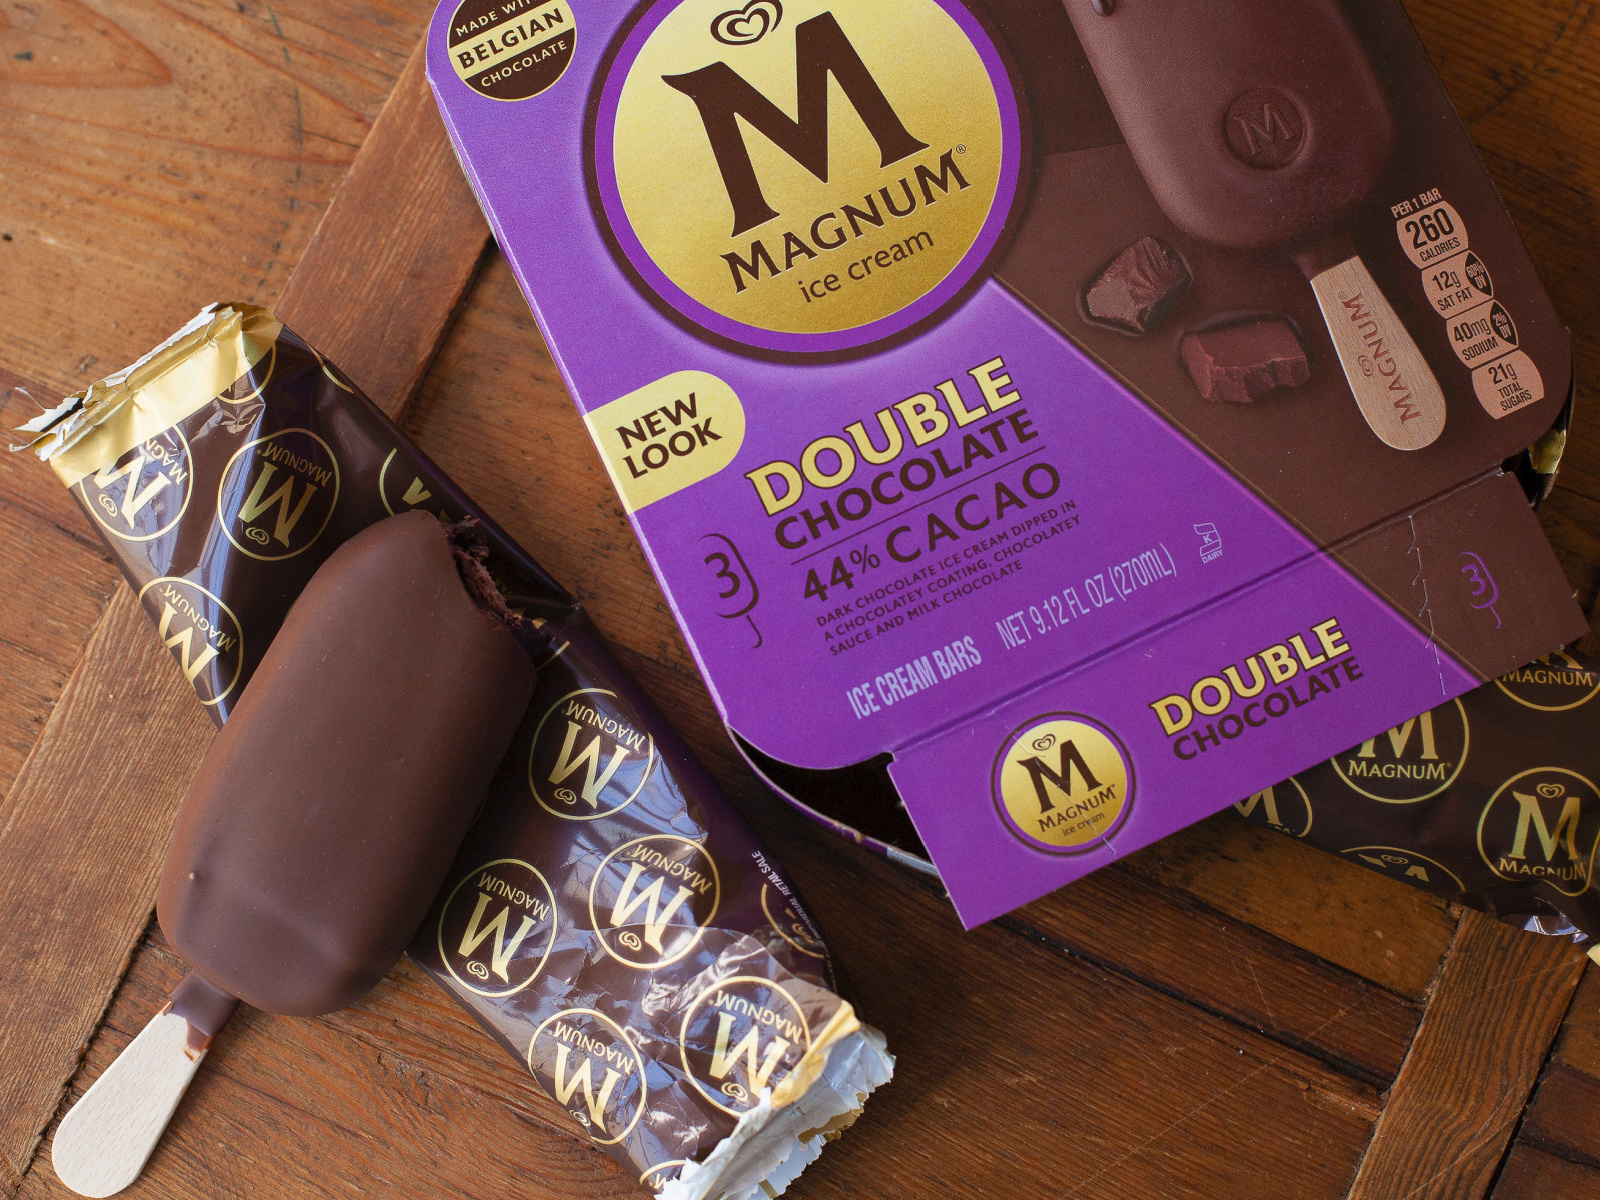 Magnum Ice Cream Bars As Low As $1.80 At Publix on I Heart Publix 1